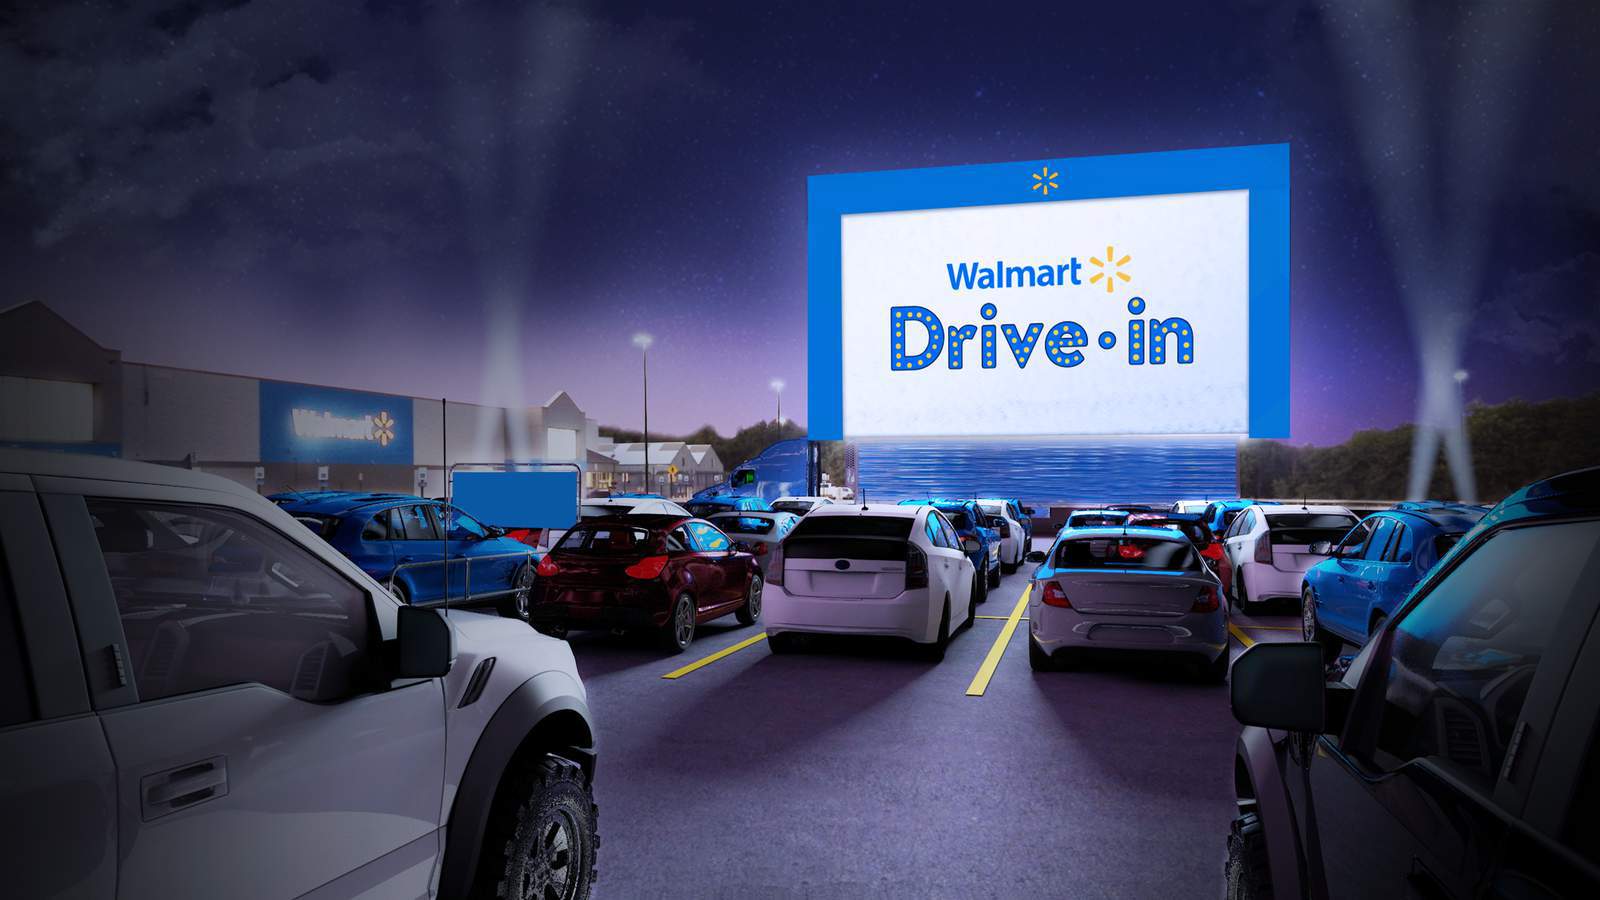 A drive-in theater is coming to this Central Florida Walmart